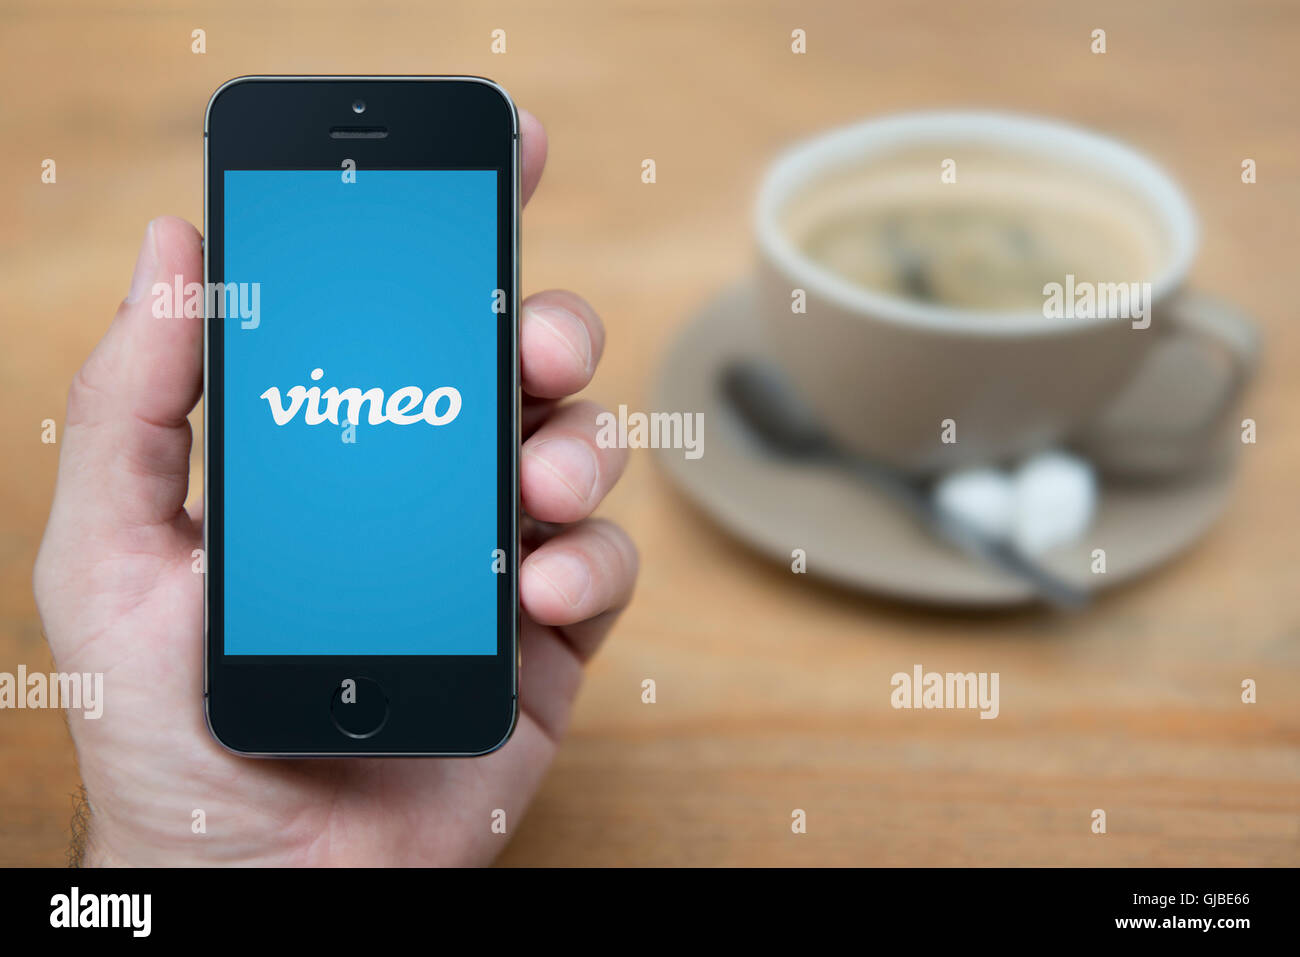 A man looks at his iPhone which displays the Vimeo logo, while sat with a cup of coffee (Editorial use only). Stock Photo